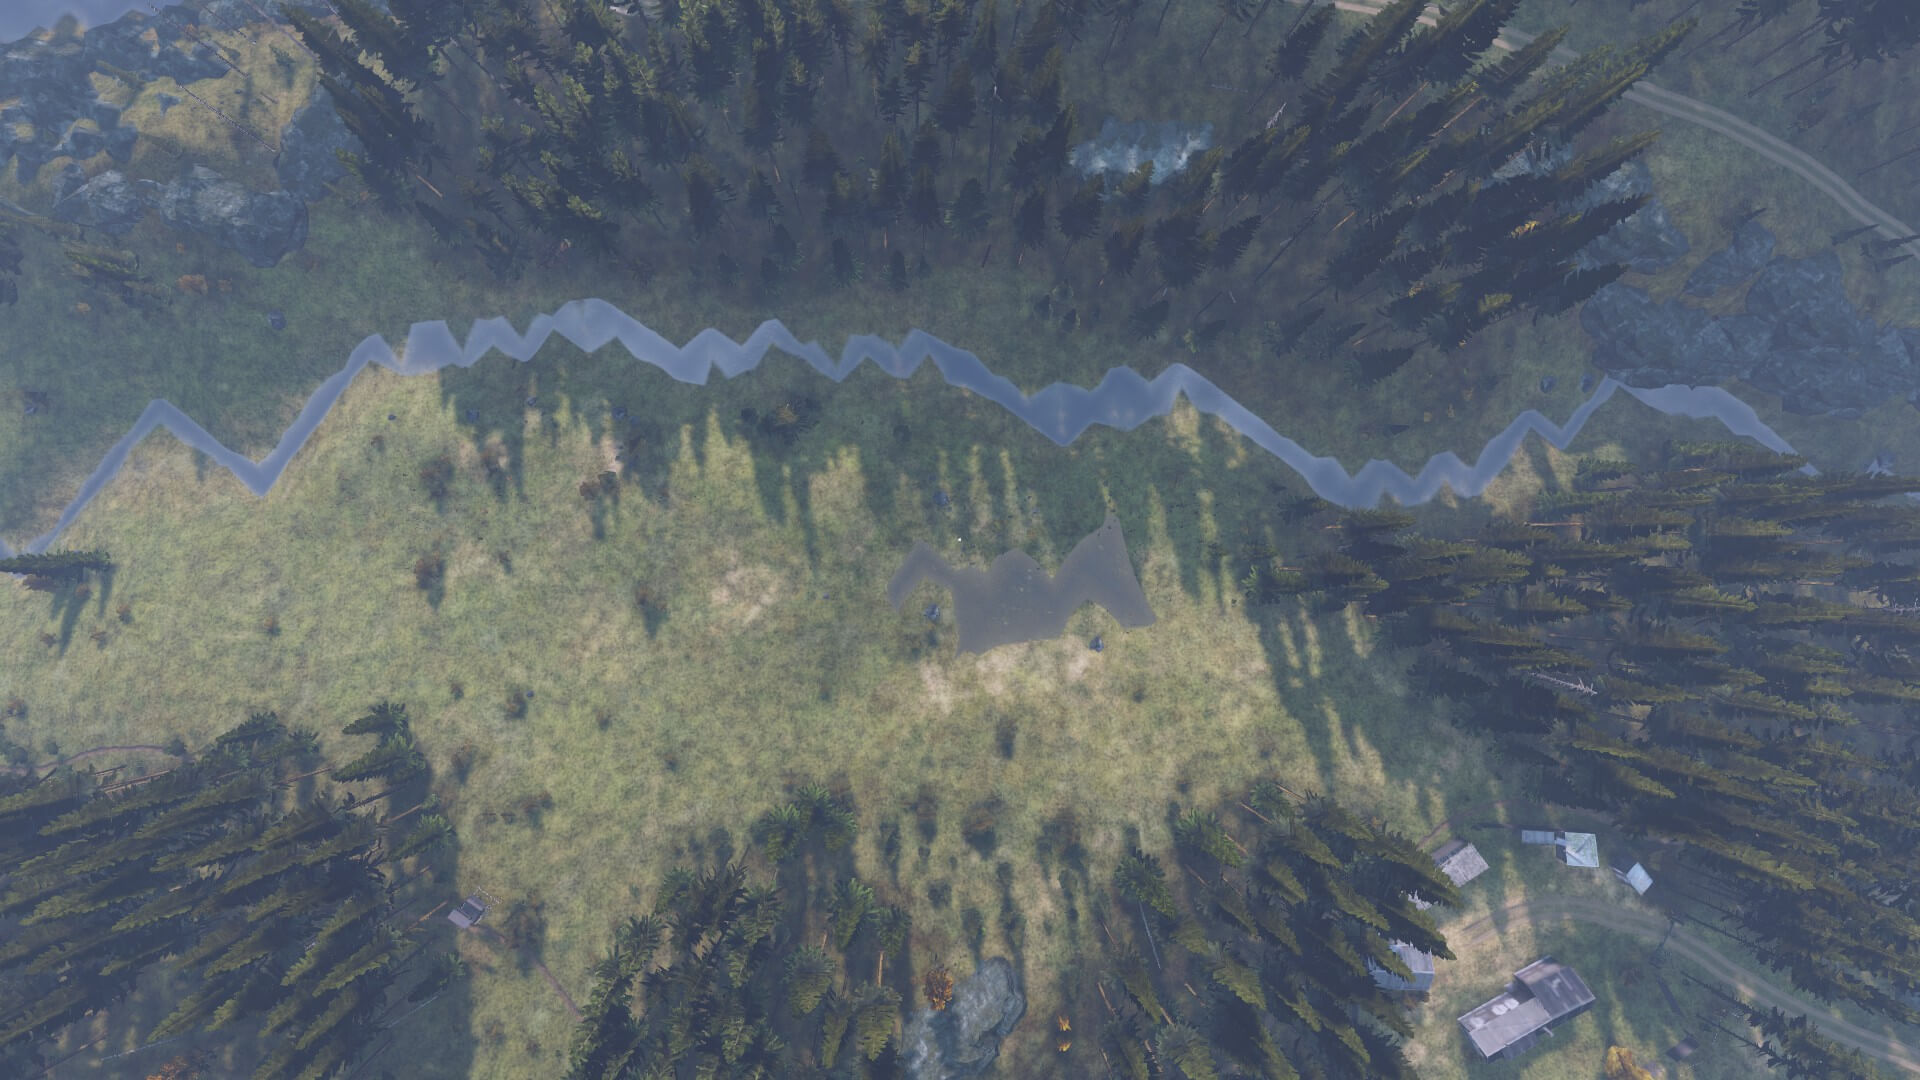 New DayZ player activity map shows where newbies won't survive